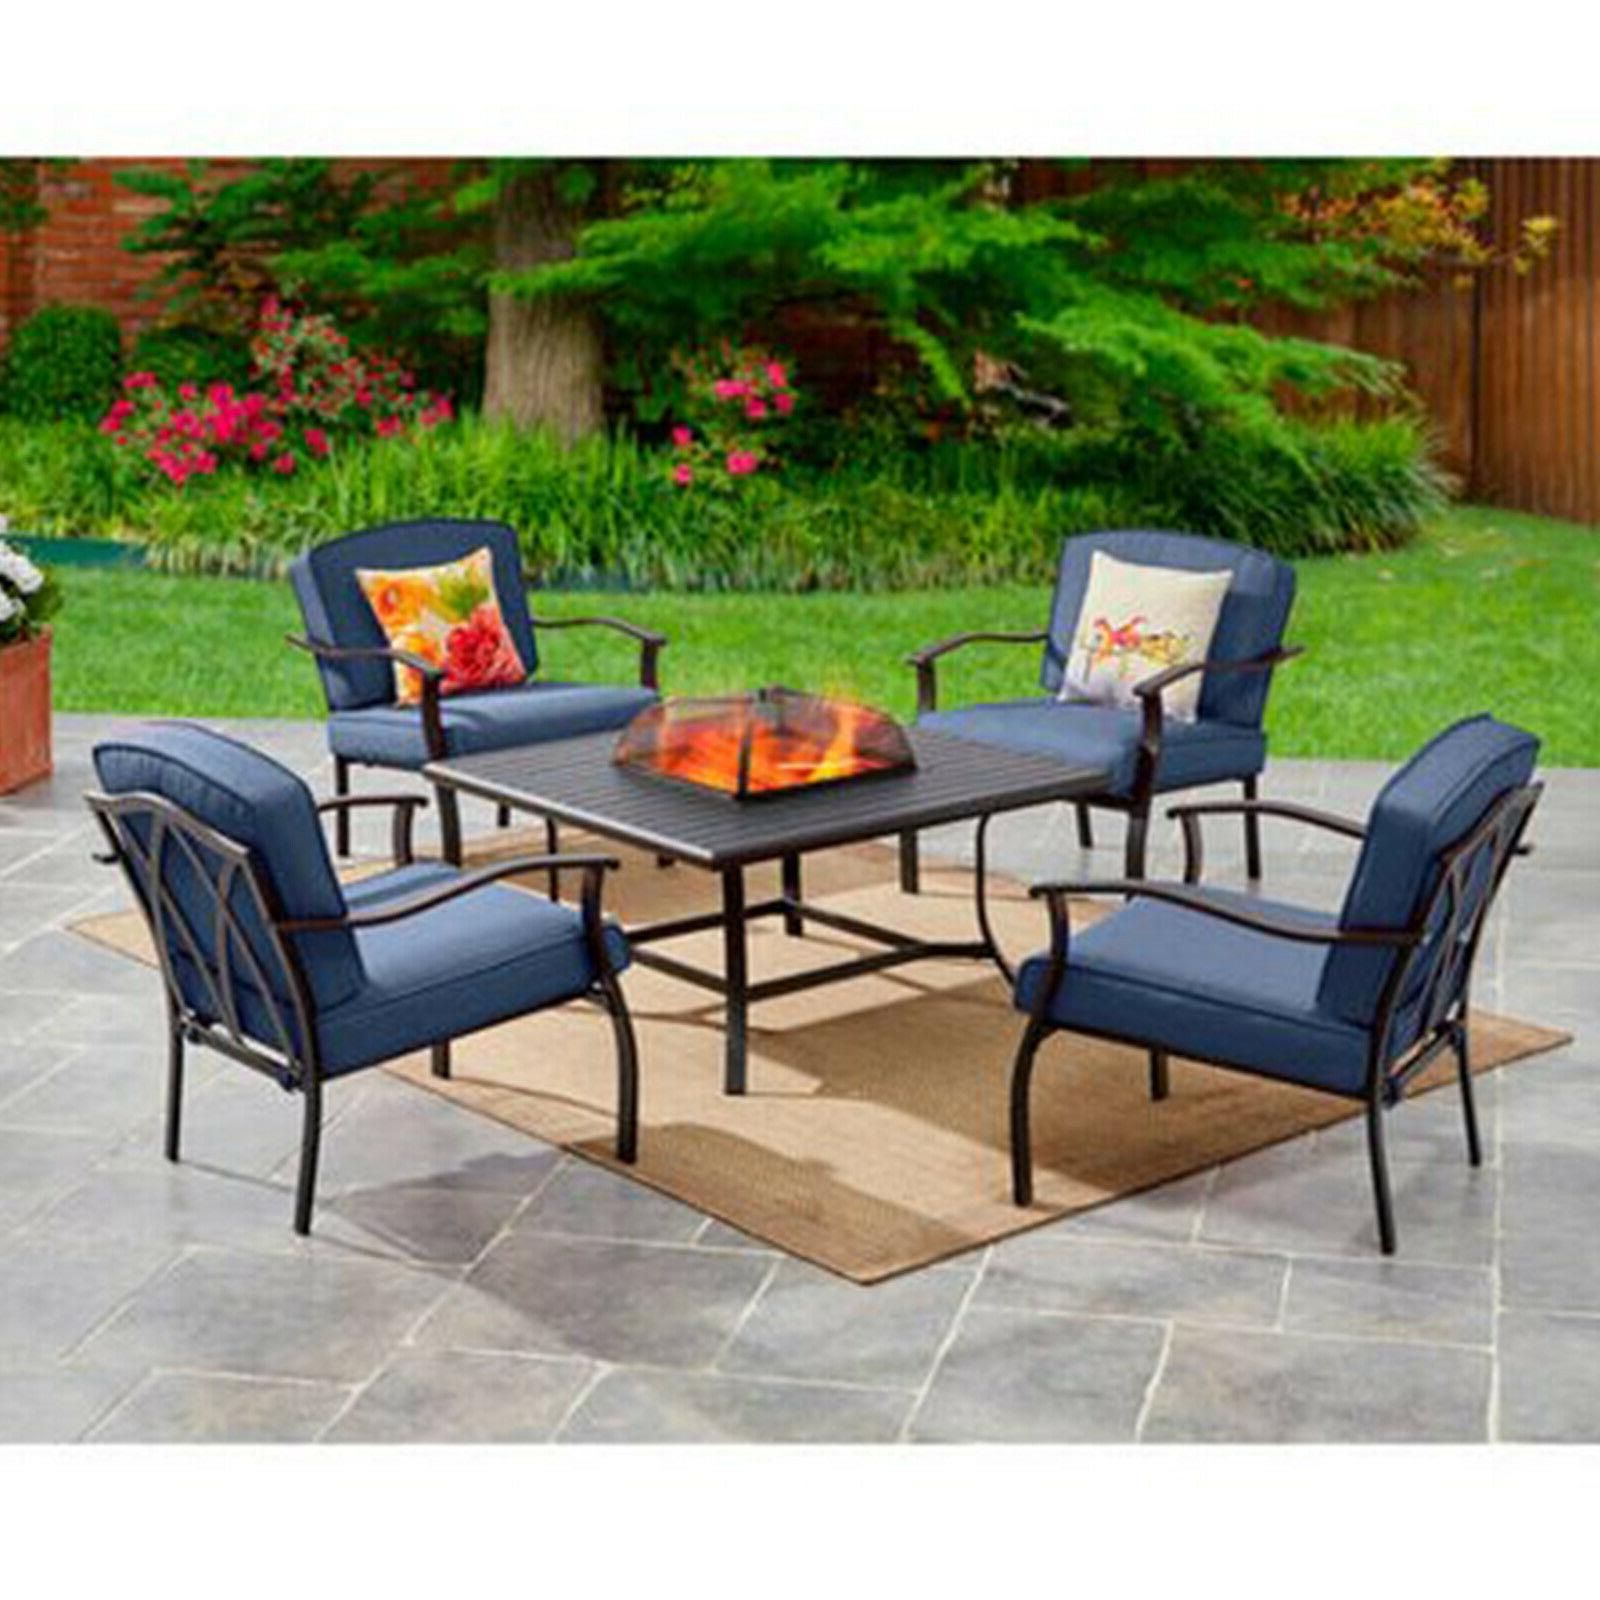 Outdoor Patio Dining Furniture Set 5 Piece Table Intended For 5 Piece Outdoor Seating Patio Sets (View 5 of 15)